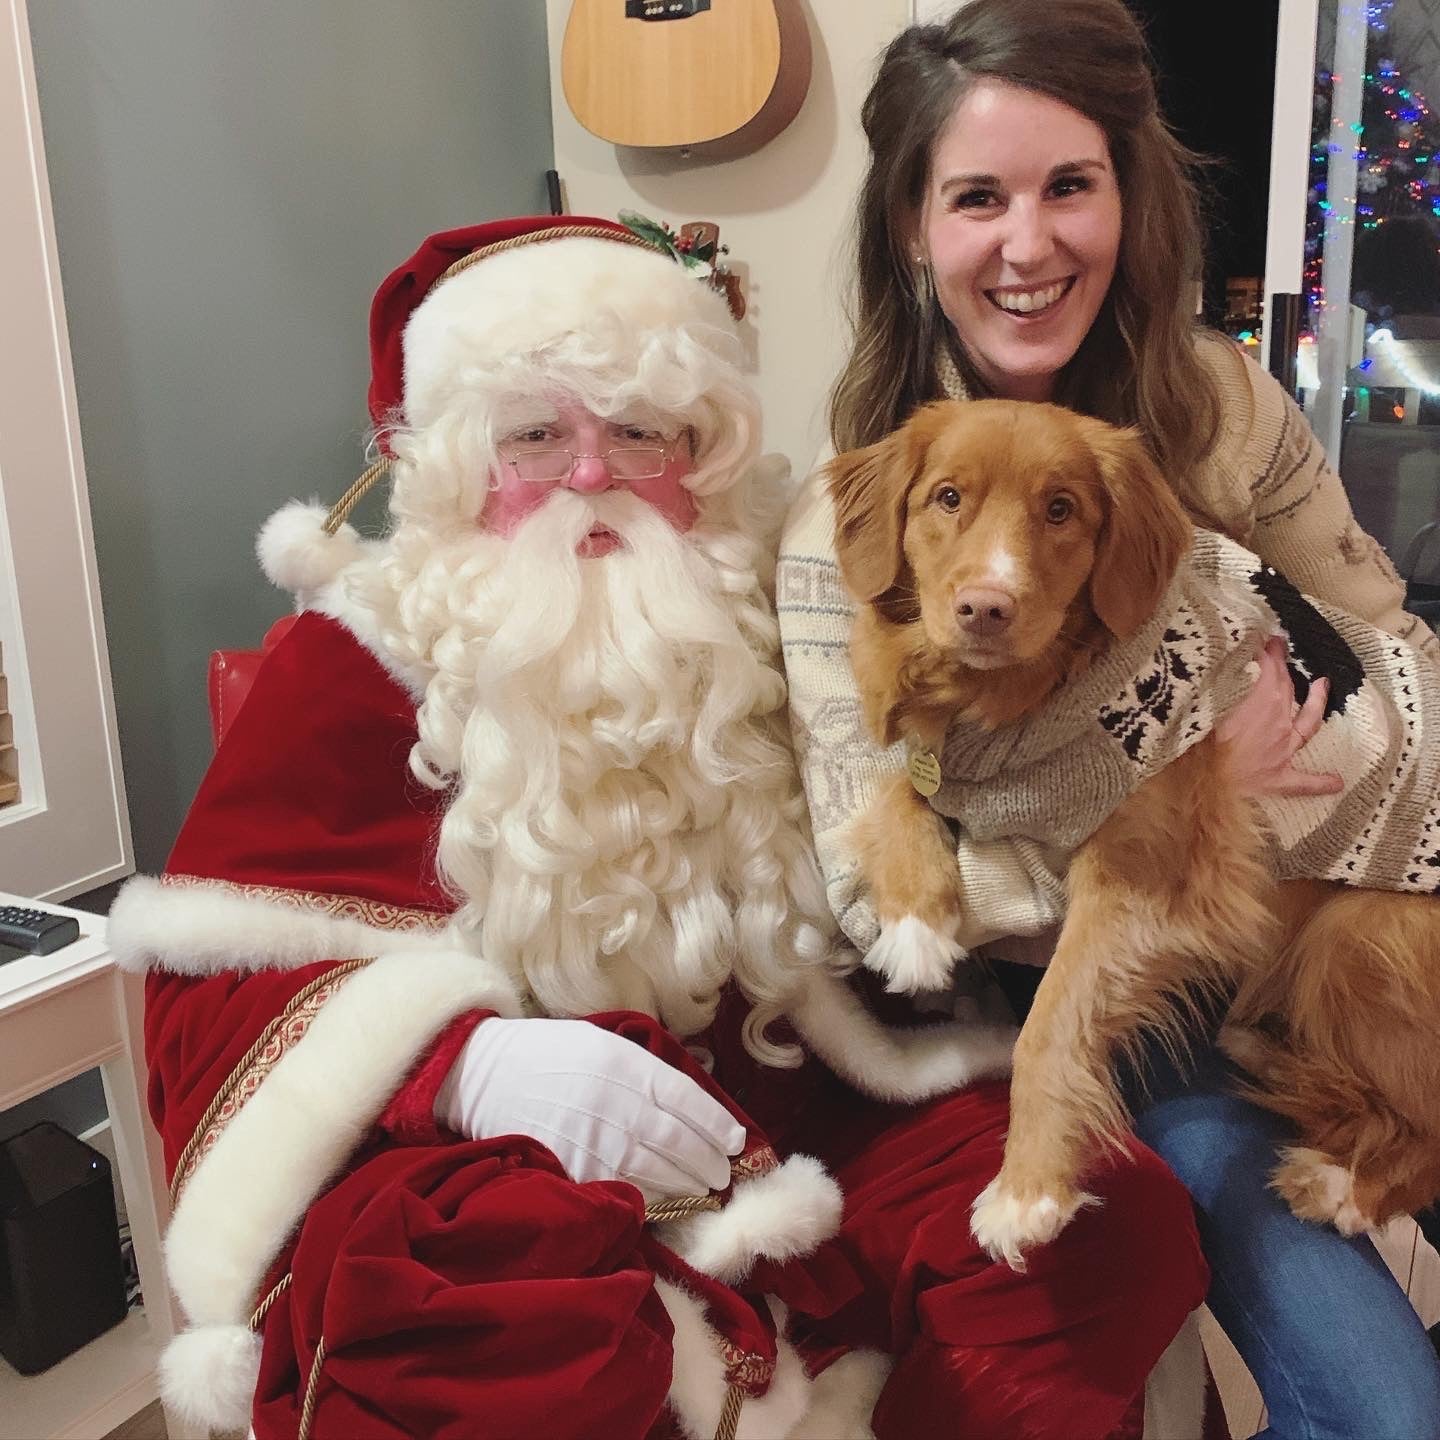 Ginny the dog poses with her mom and Santa as part of the What Sparks Holiday Joy blog post with Rocky Mountain Soap Company.